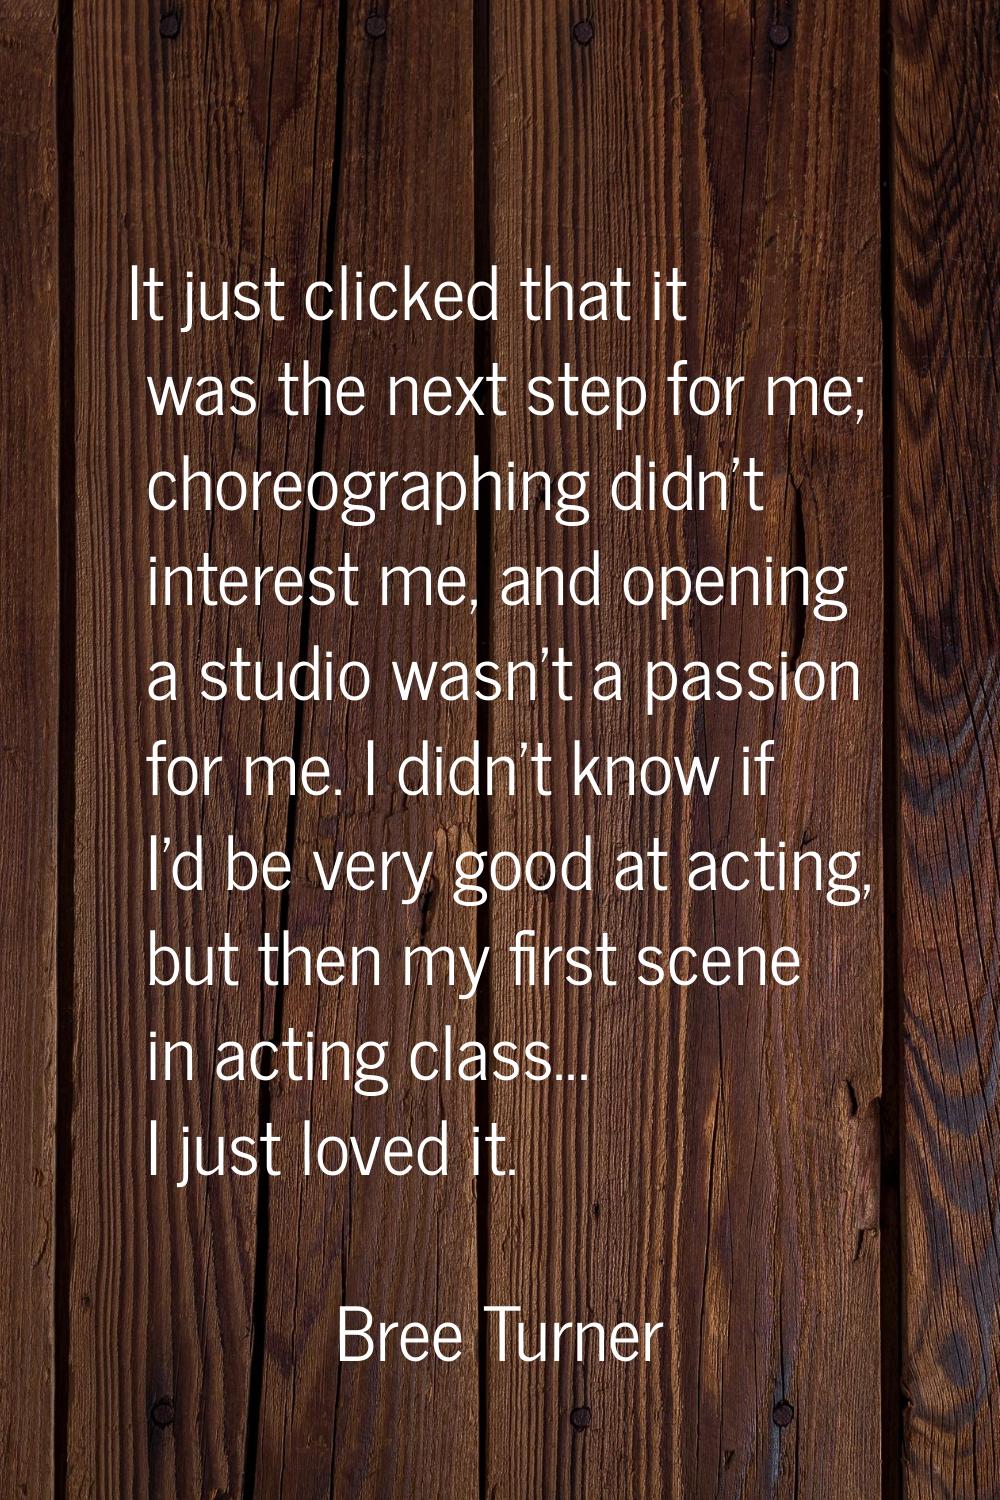 It just clicked that it was the next step for me; choreographing didn't interest me, and opening a 